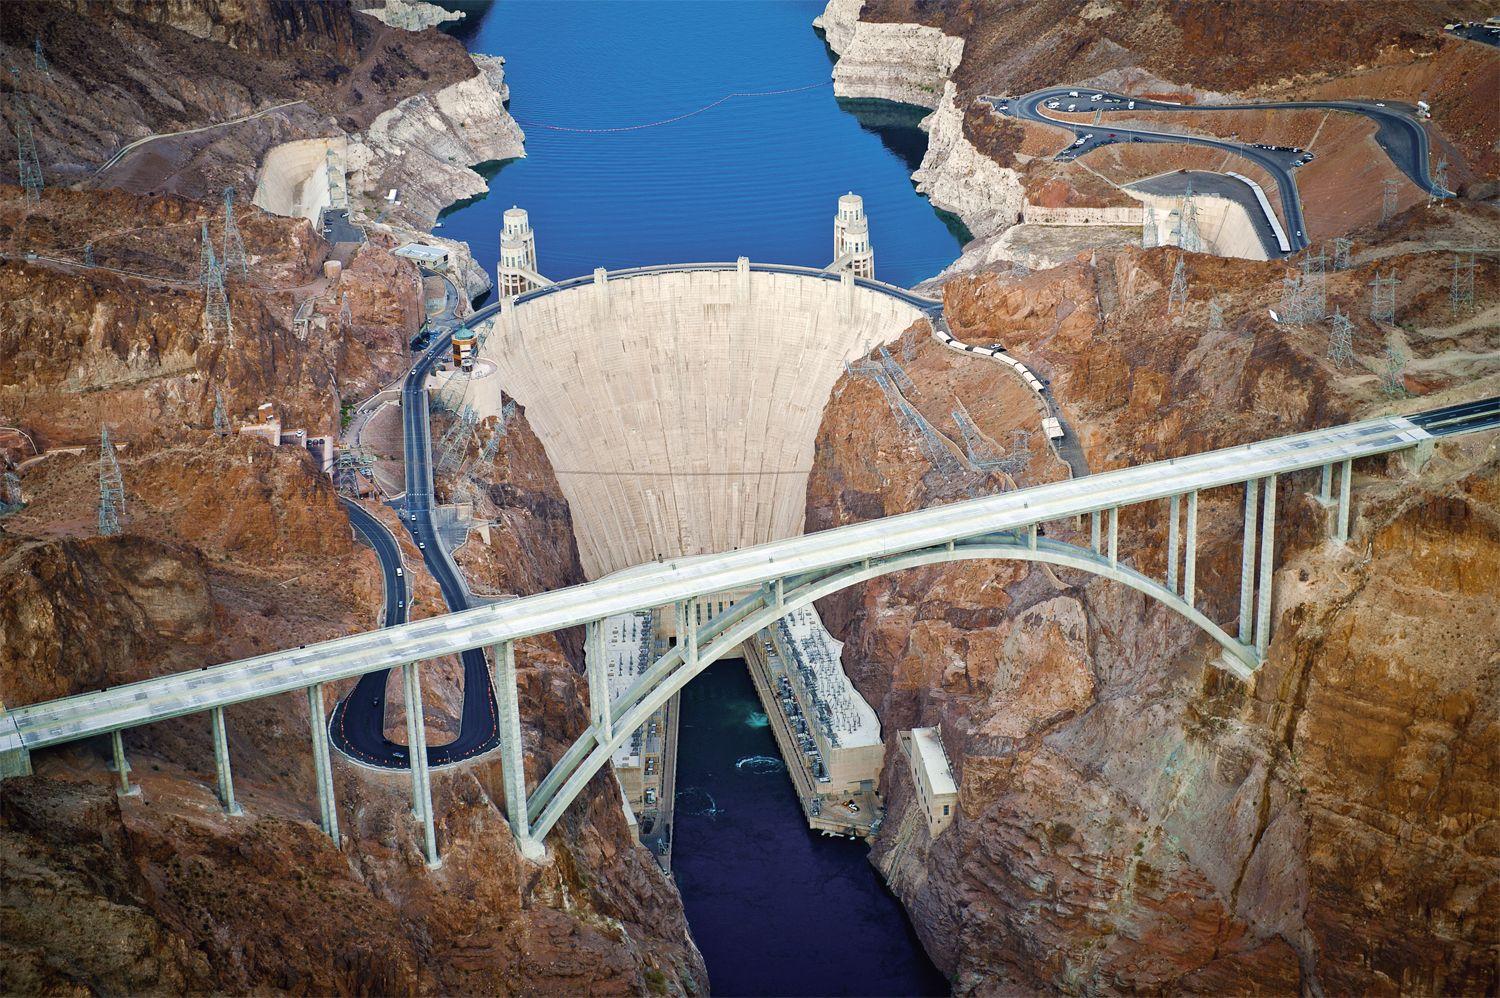 1389x454px Hoover Dam 546.45 KB